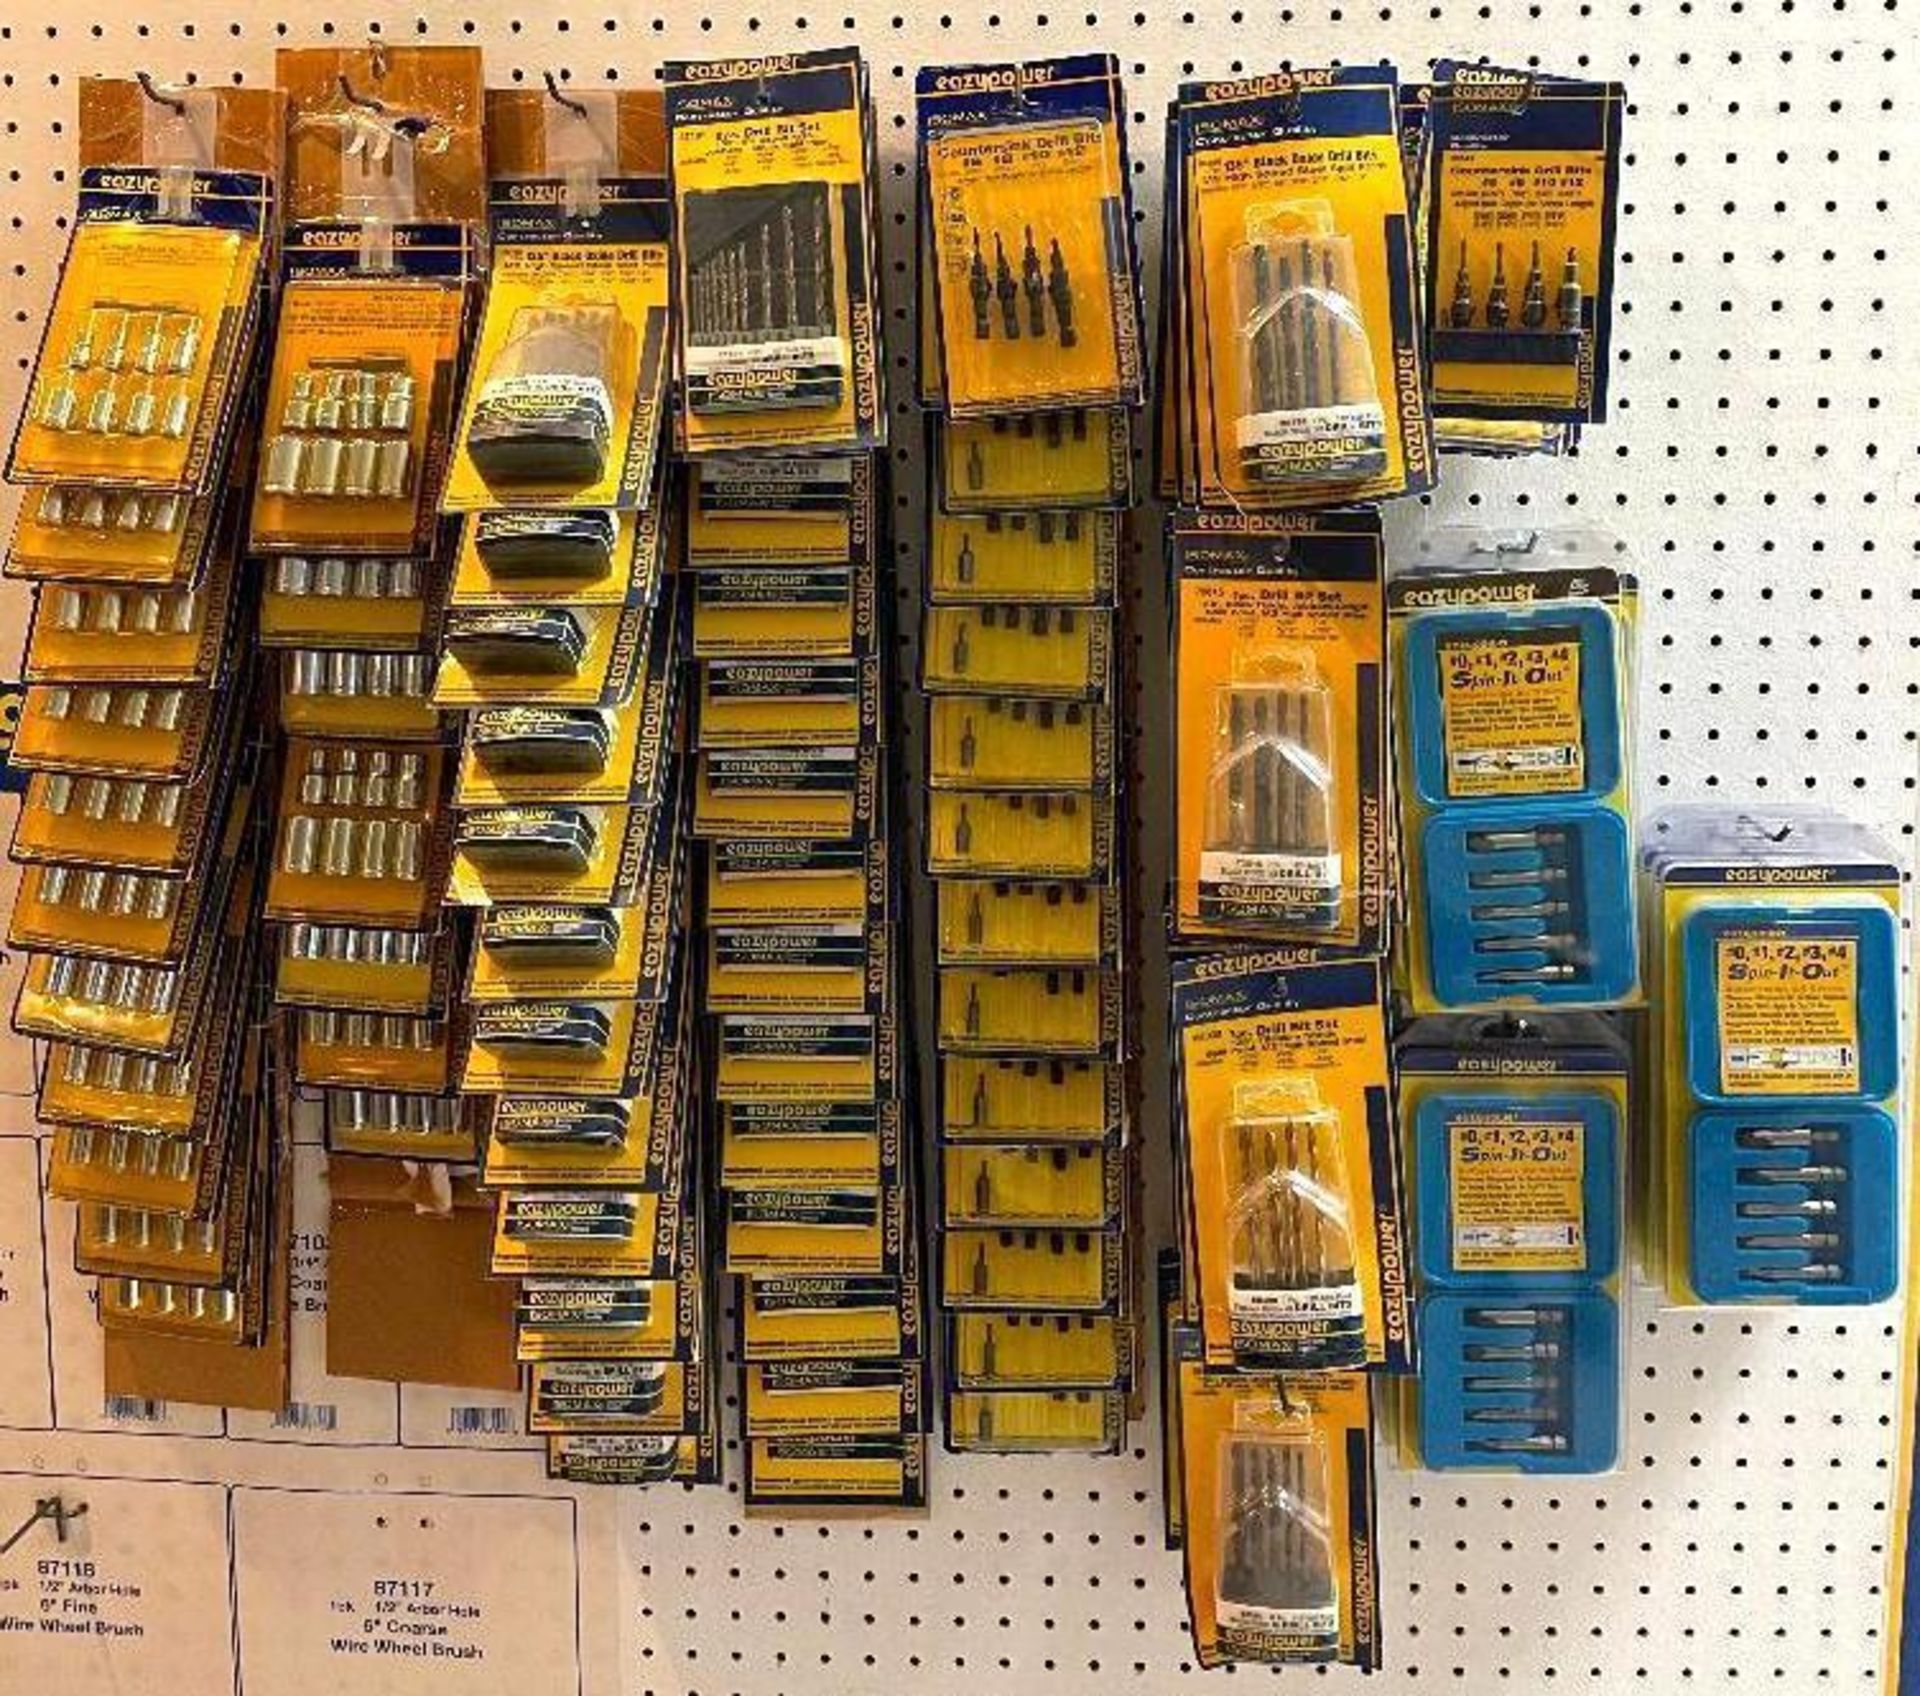 CONTENTS OF PEGBOARD AS SHOWN(ASSORTED DRILL BIT SETS) BRAND/MODEL EAZYPOWER LOCATION SHOWROOM THIS - Image 2 of 8